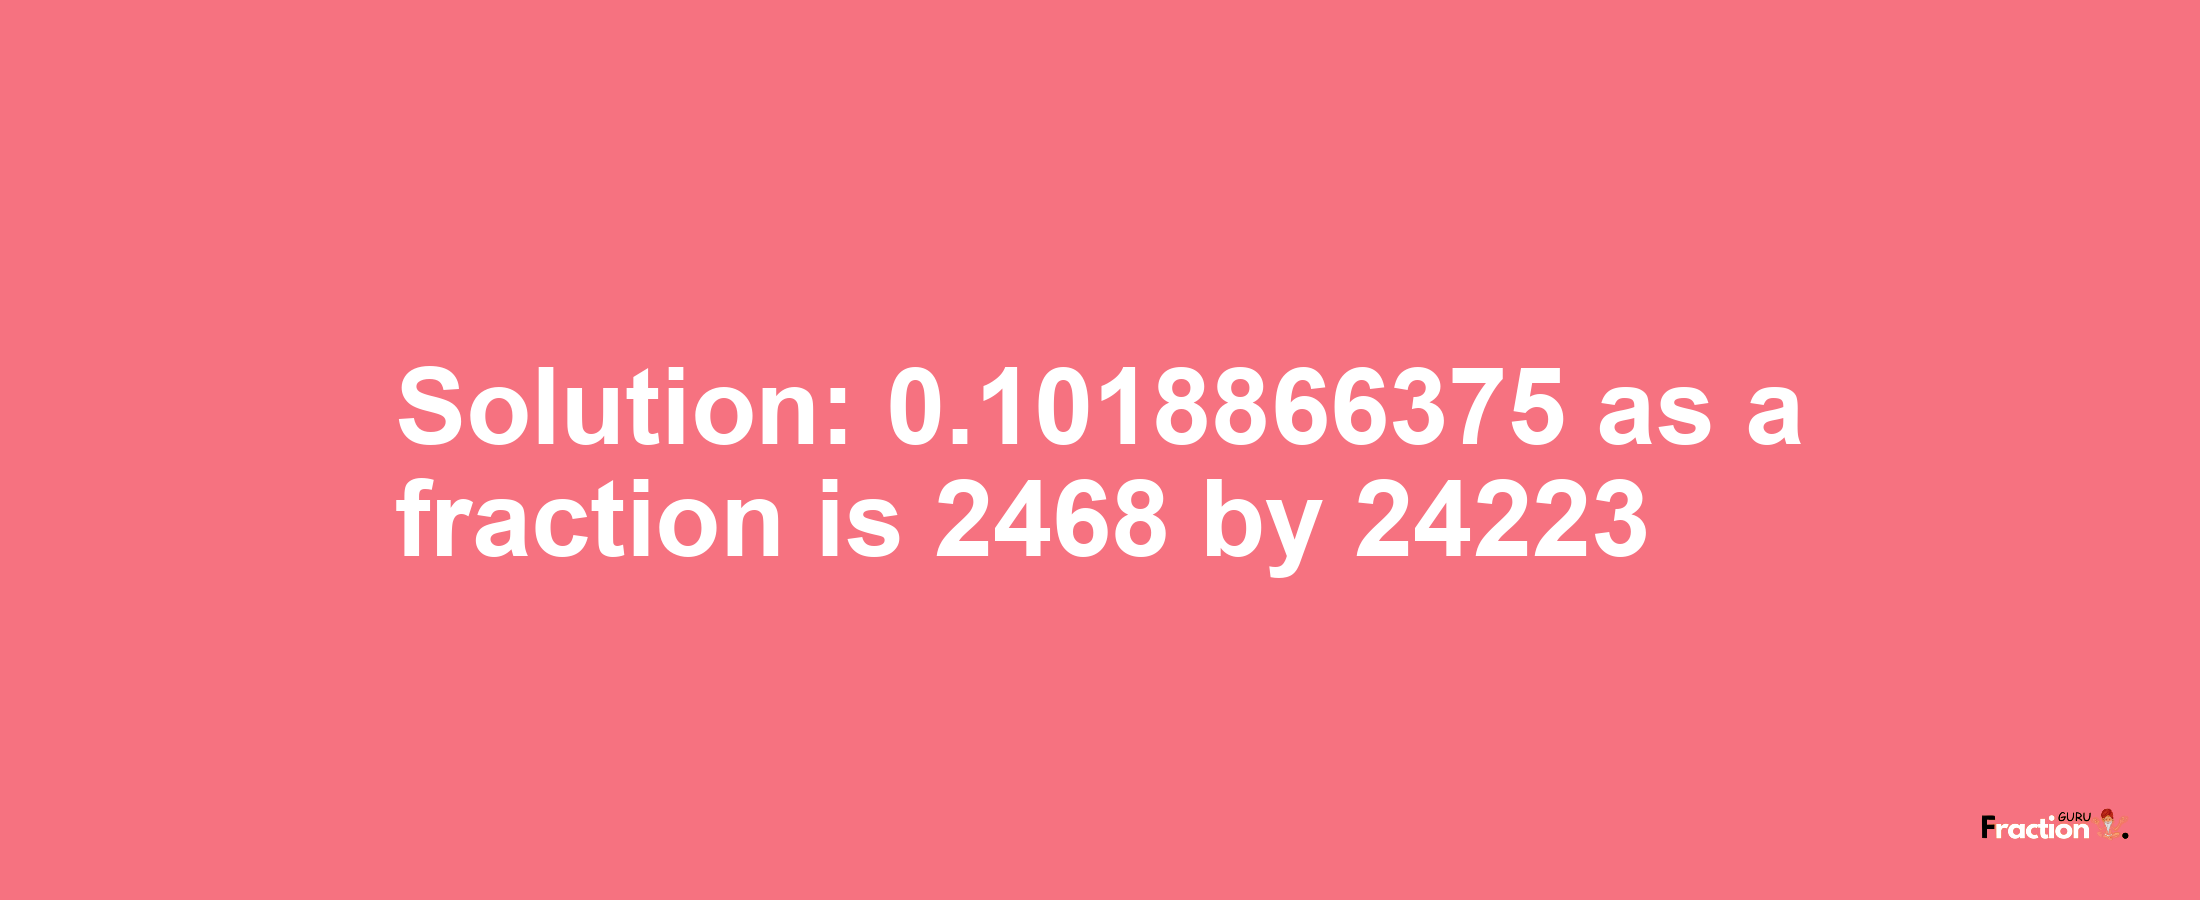 Solution:0.1018866375 as a fraction is 2468/24223